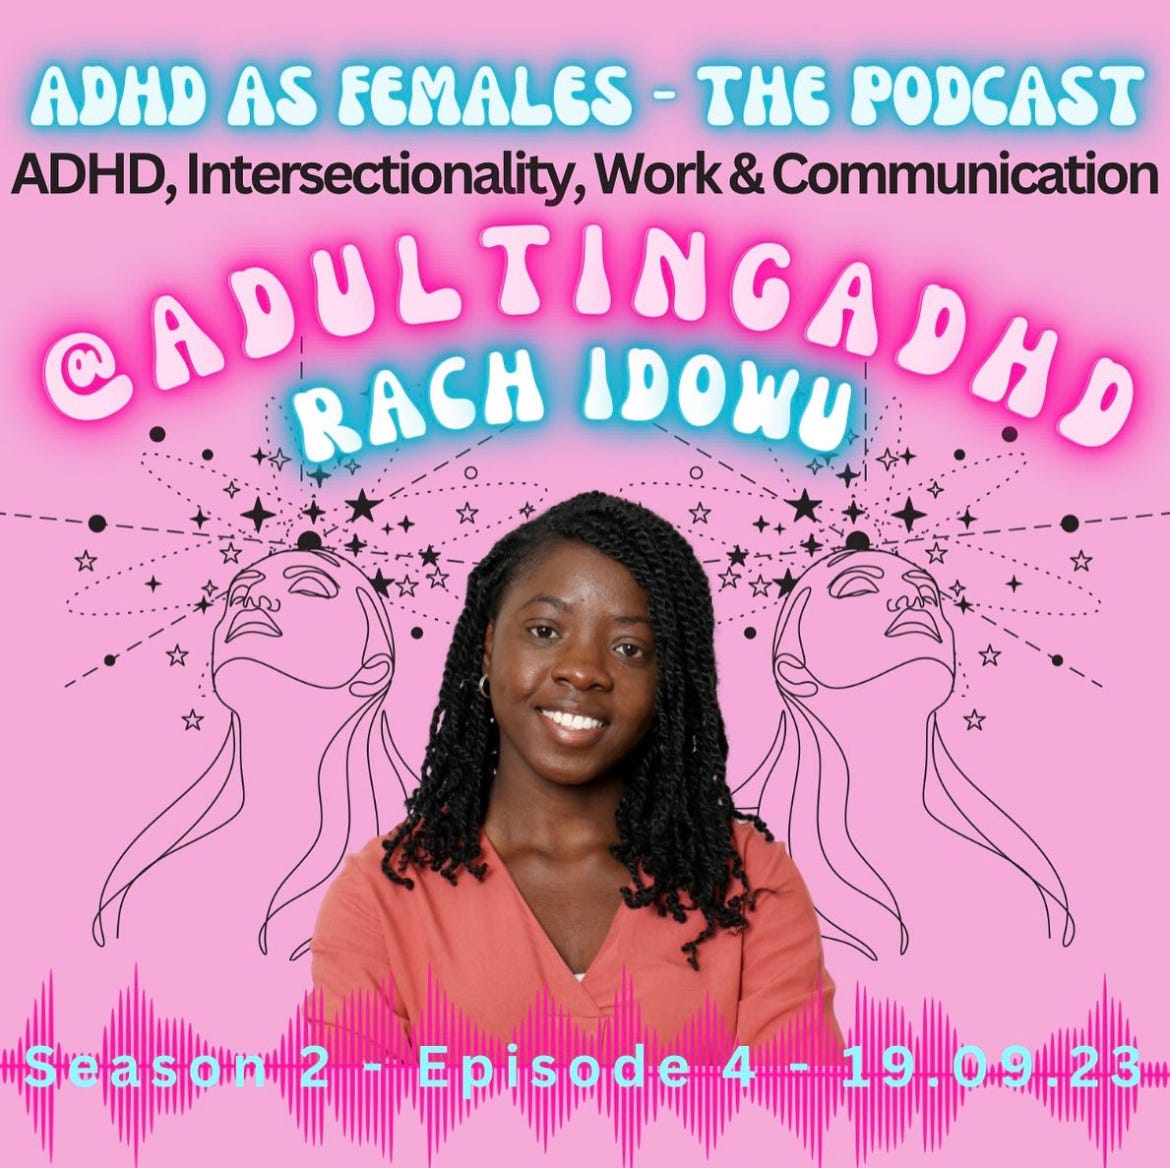 Promotional image of a podcast episode. A picture of myself wearing a coral shirt placed in the middle of  2 identical drawings depicted a woman looking upwards with her eyes closed. The writing on the image says ‘ADHD as Females - The Podcast’, ADHD, Intersectionality, Work & Communication